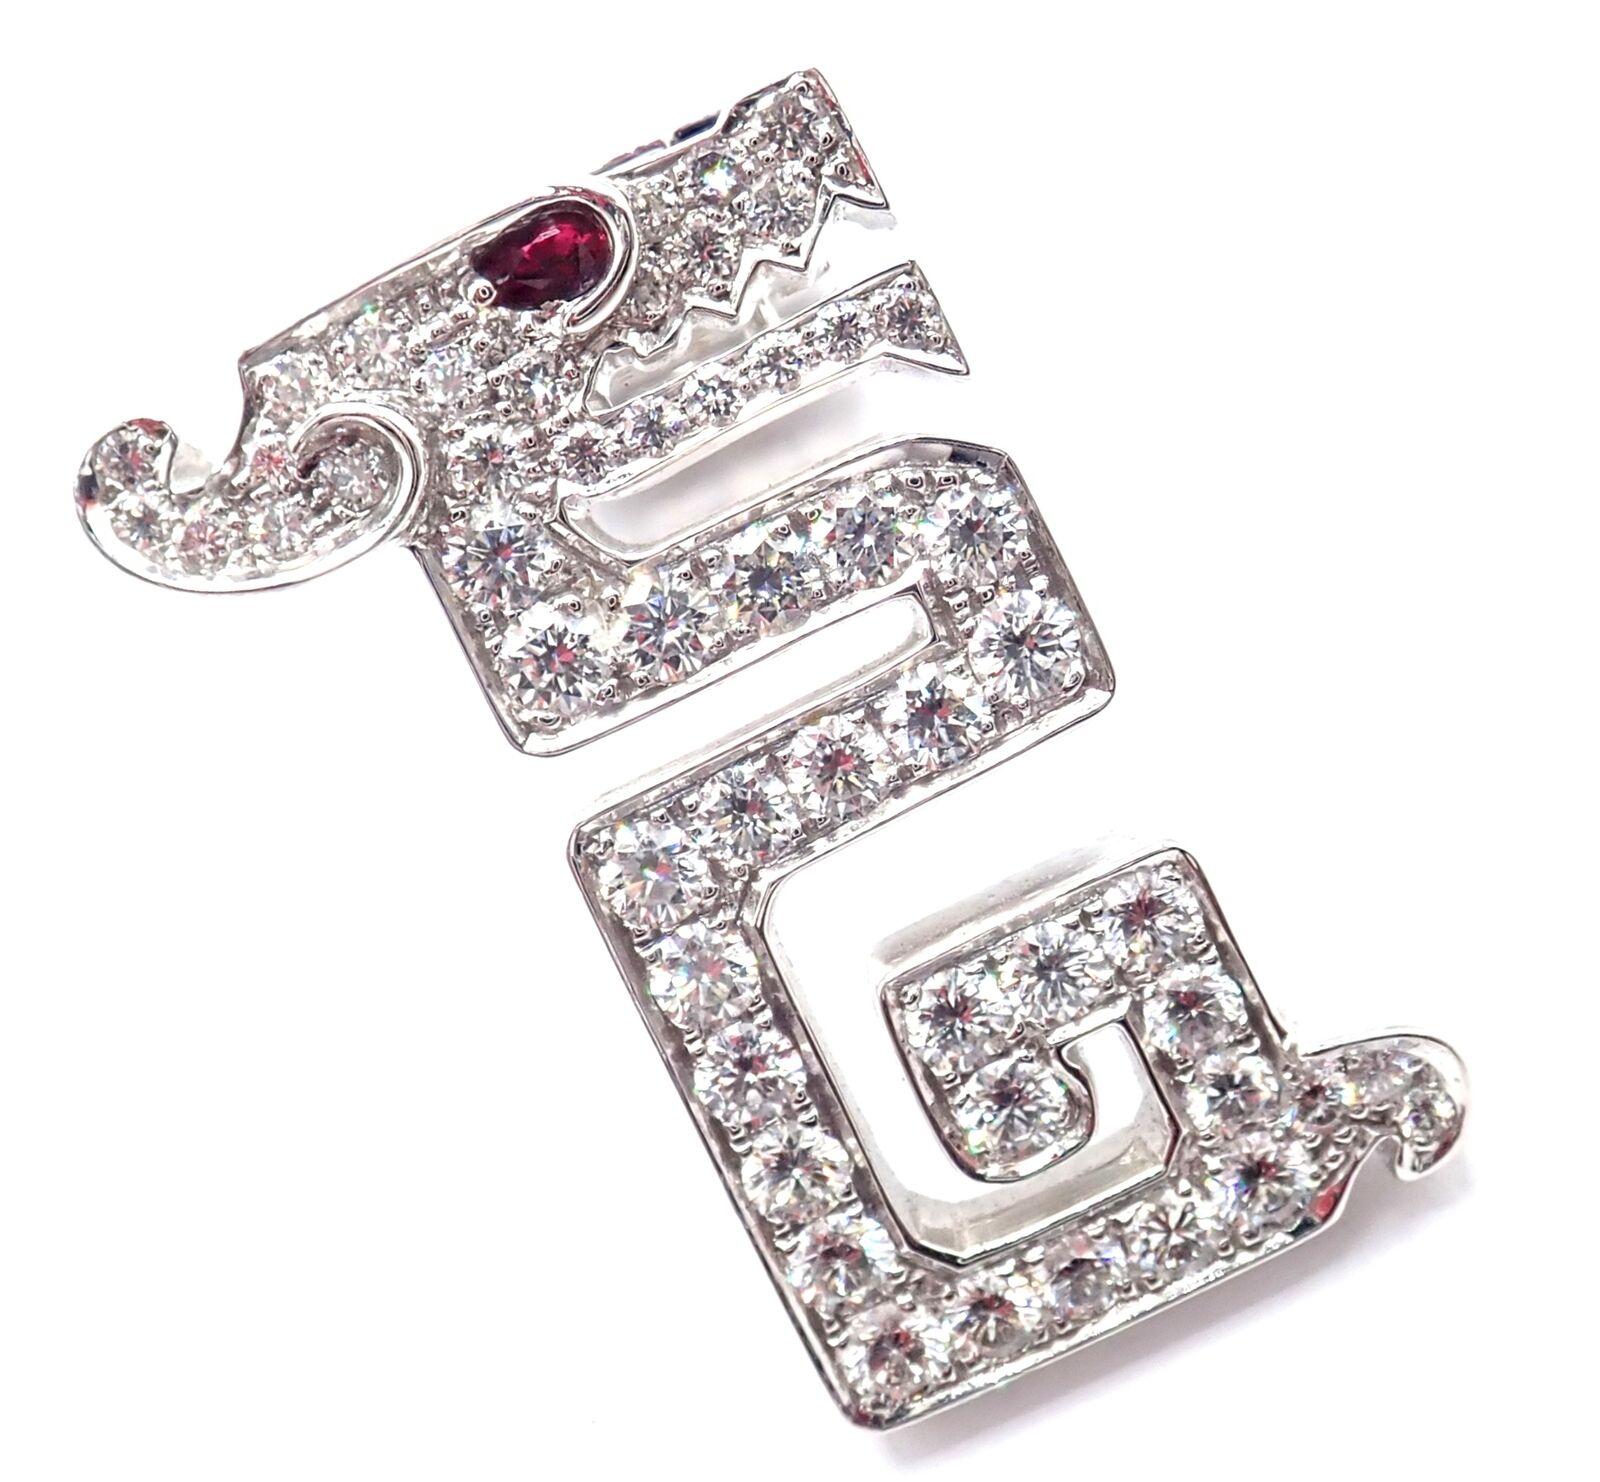 18k White Gold Le Baiser Du Dragon Diamond Ruby Pin Clip by Cartier.
With 52 Round brilliant cut diamonds VVS1 clarity E color total weight approx. .90ct and 1 ruby in the eye
Details:
Measurements: 23mm x 15.5mm
Weight: 8.5 grams
Stamped Hallmarks: